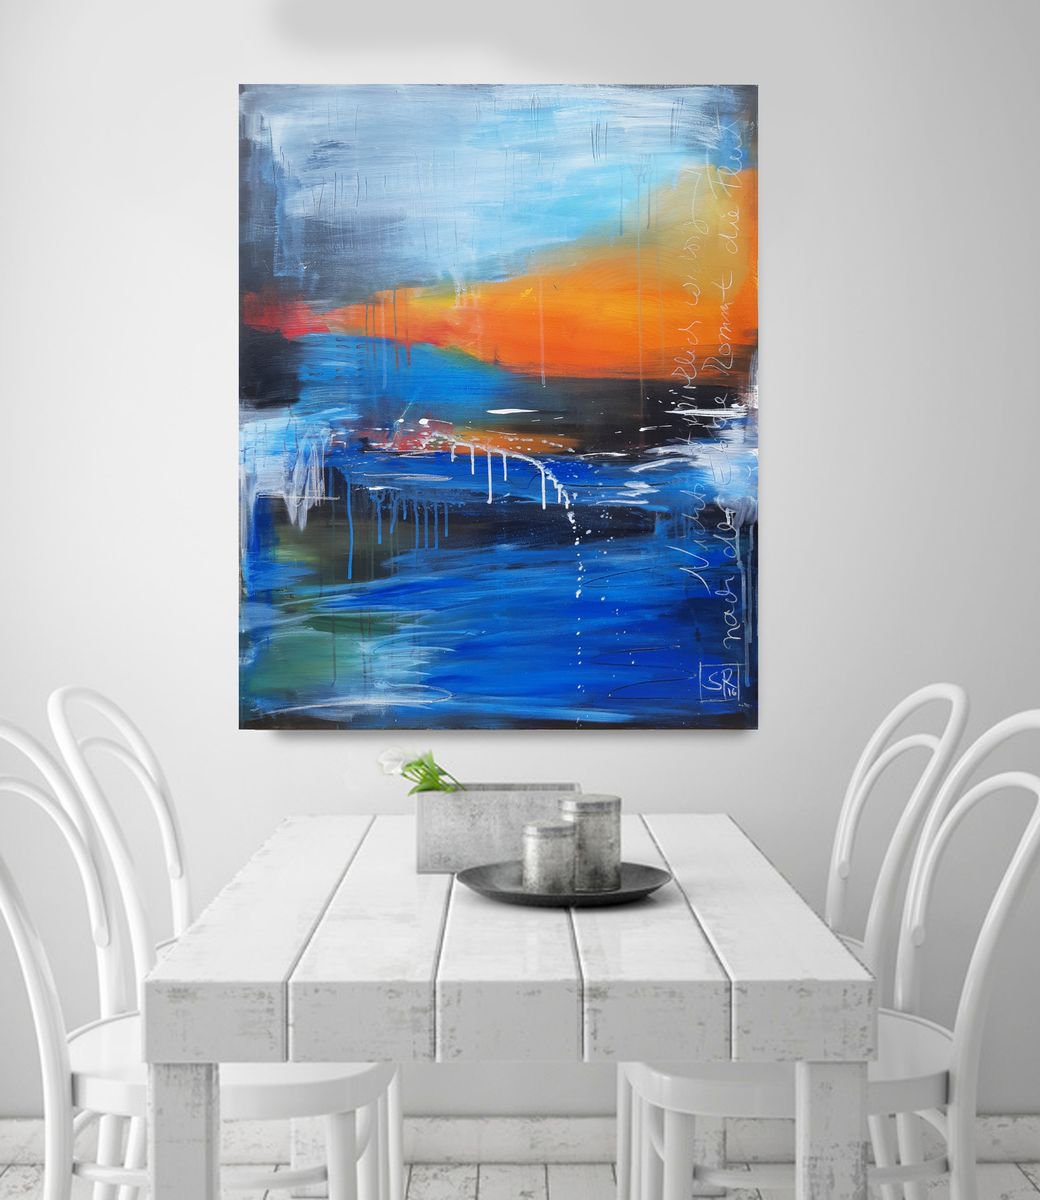 ’AFTER EBB COMES THE FLOOD’ - Abstract seascape by Stefanie Rogge